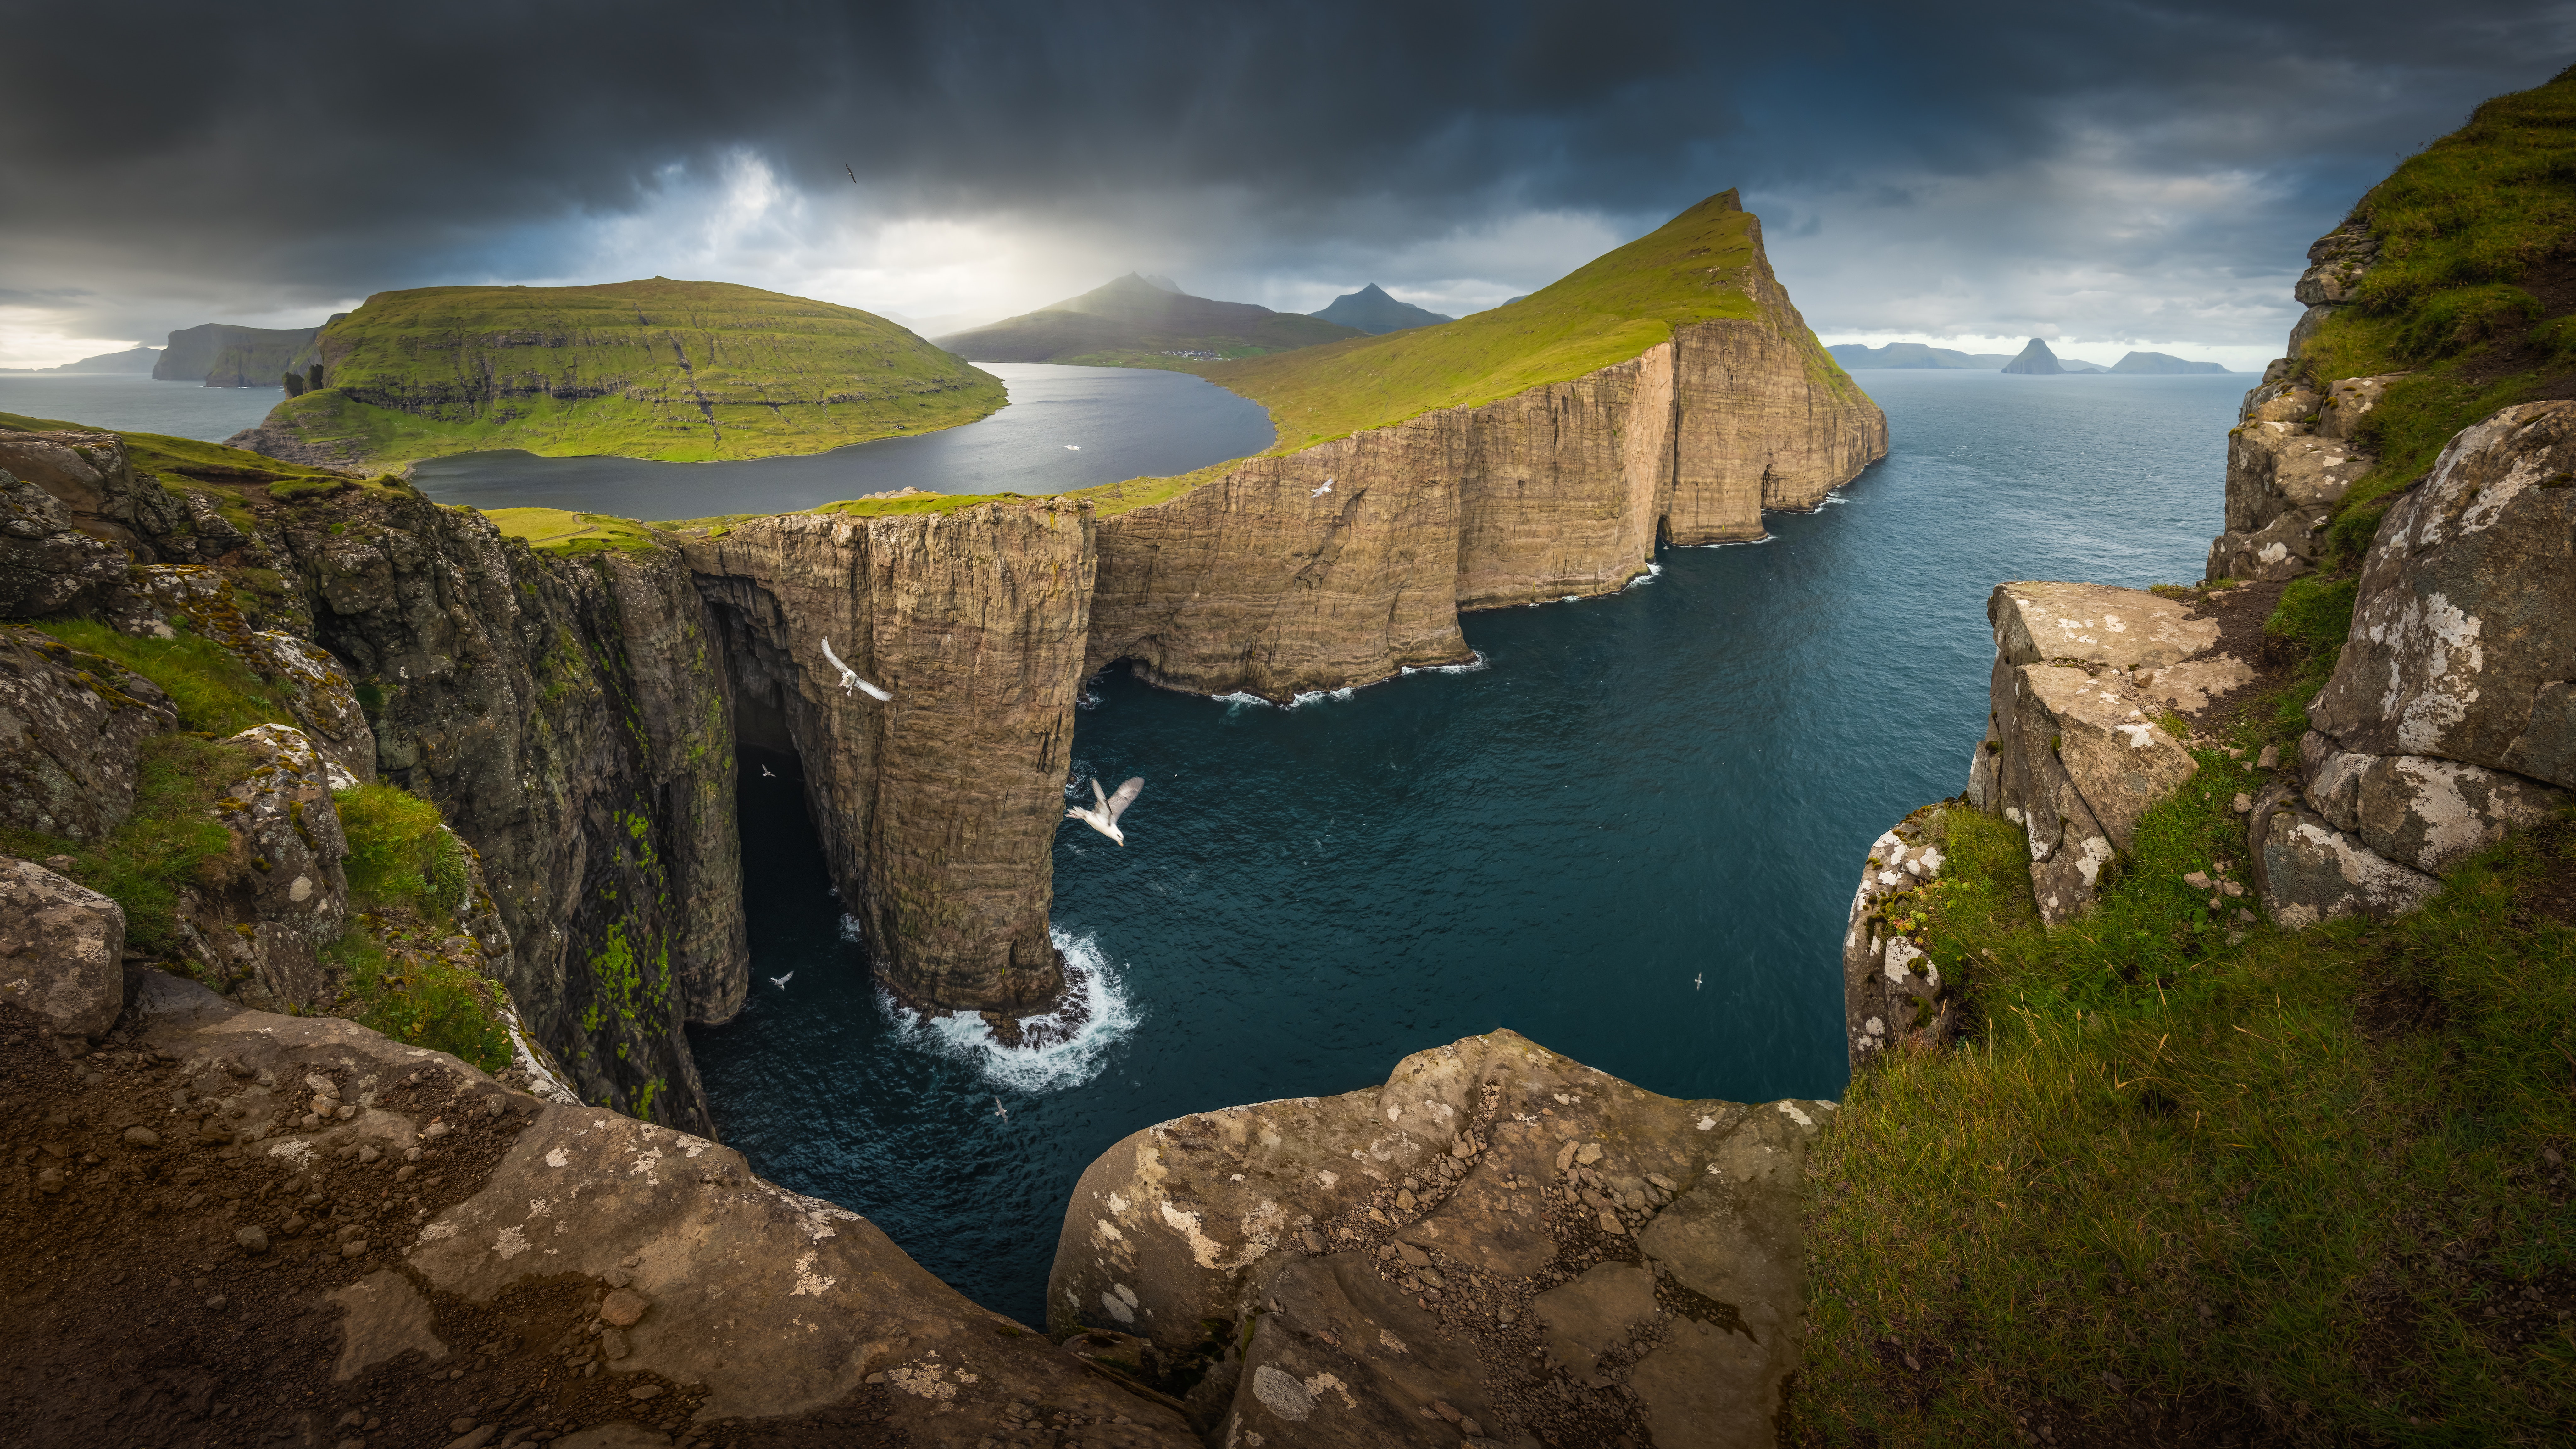 General 8192x4608 photography nature landscape mountains sea Faroe Islands island cliff water clouds grass birds